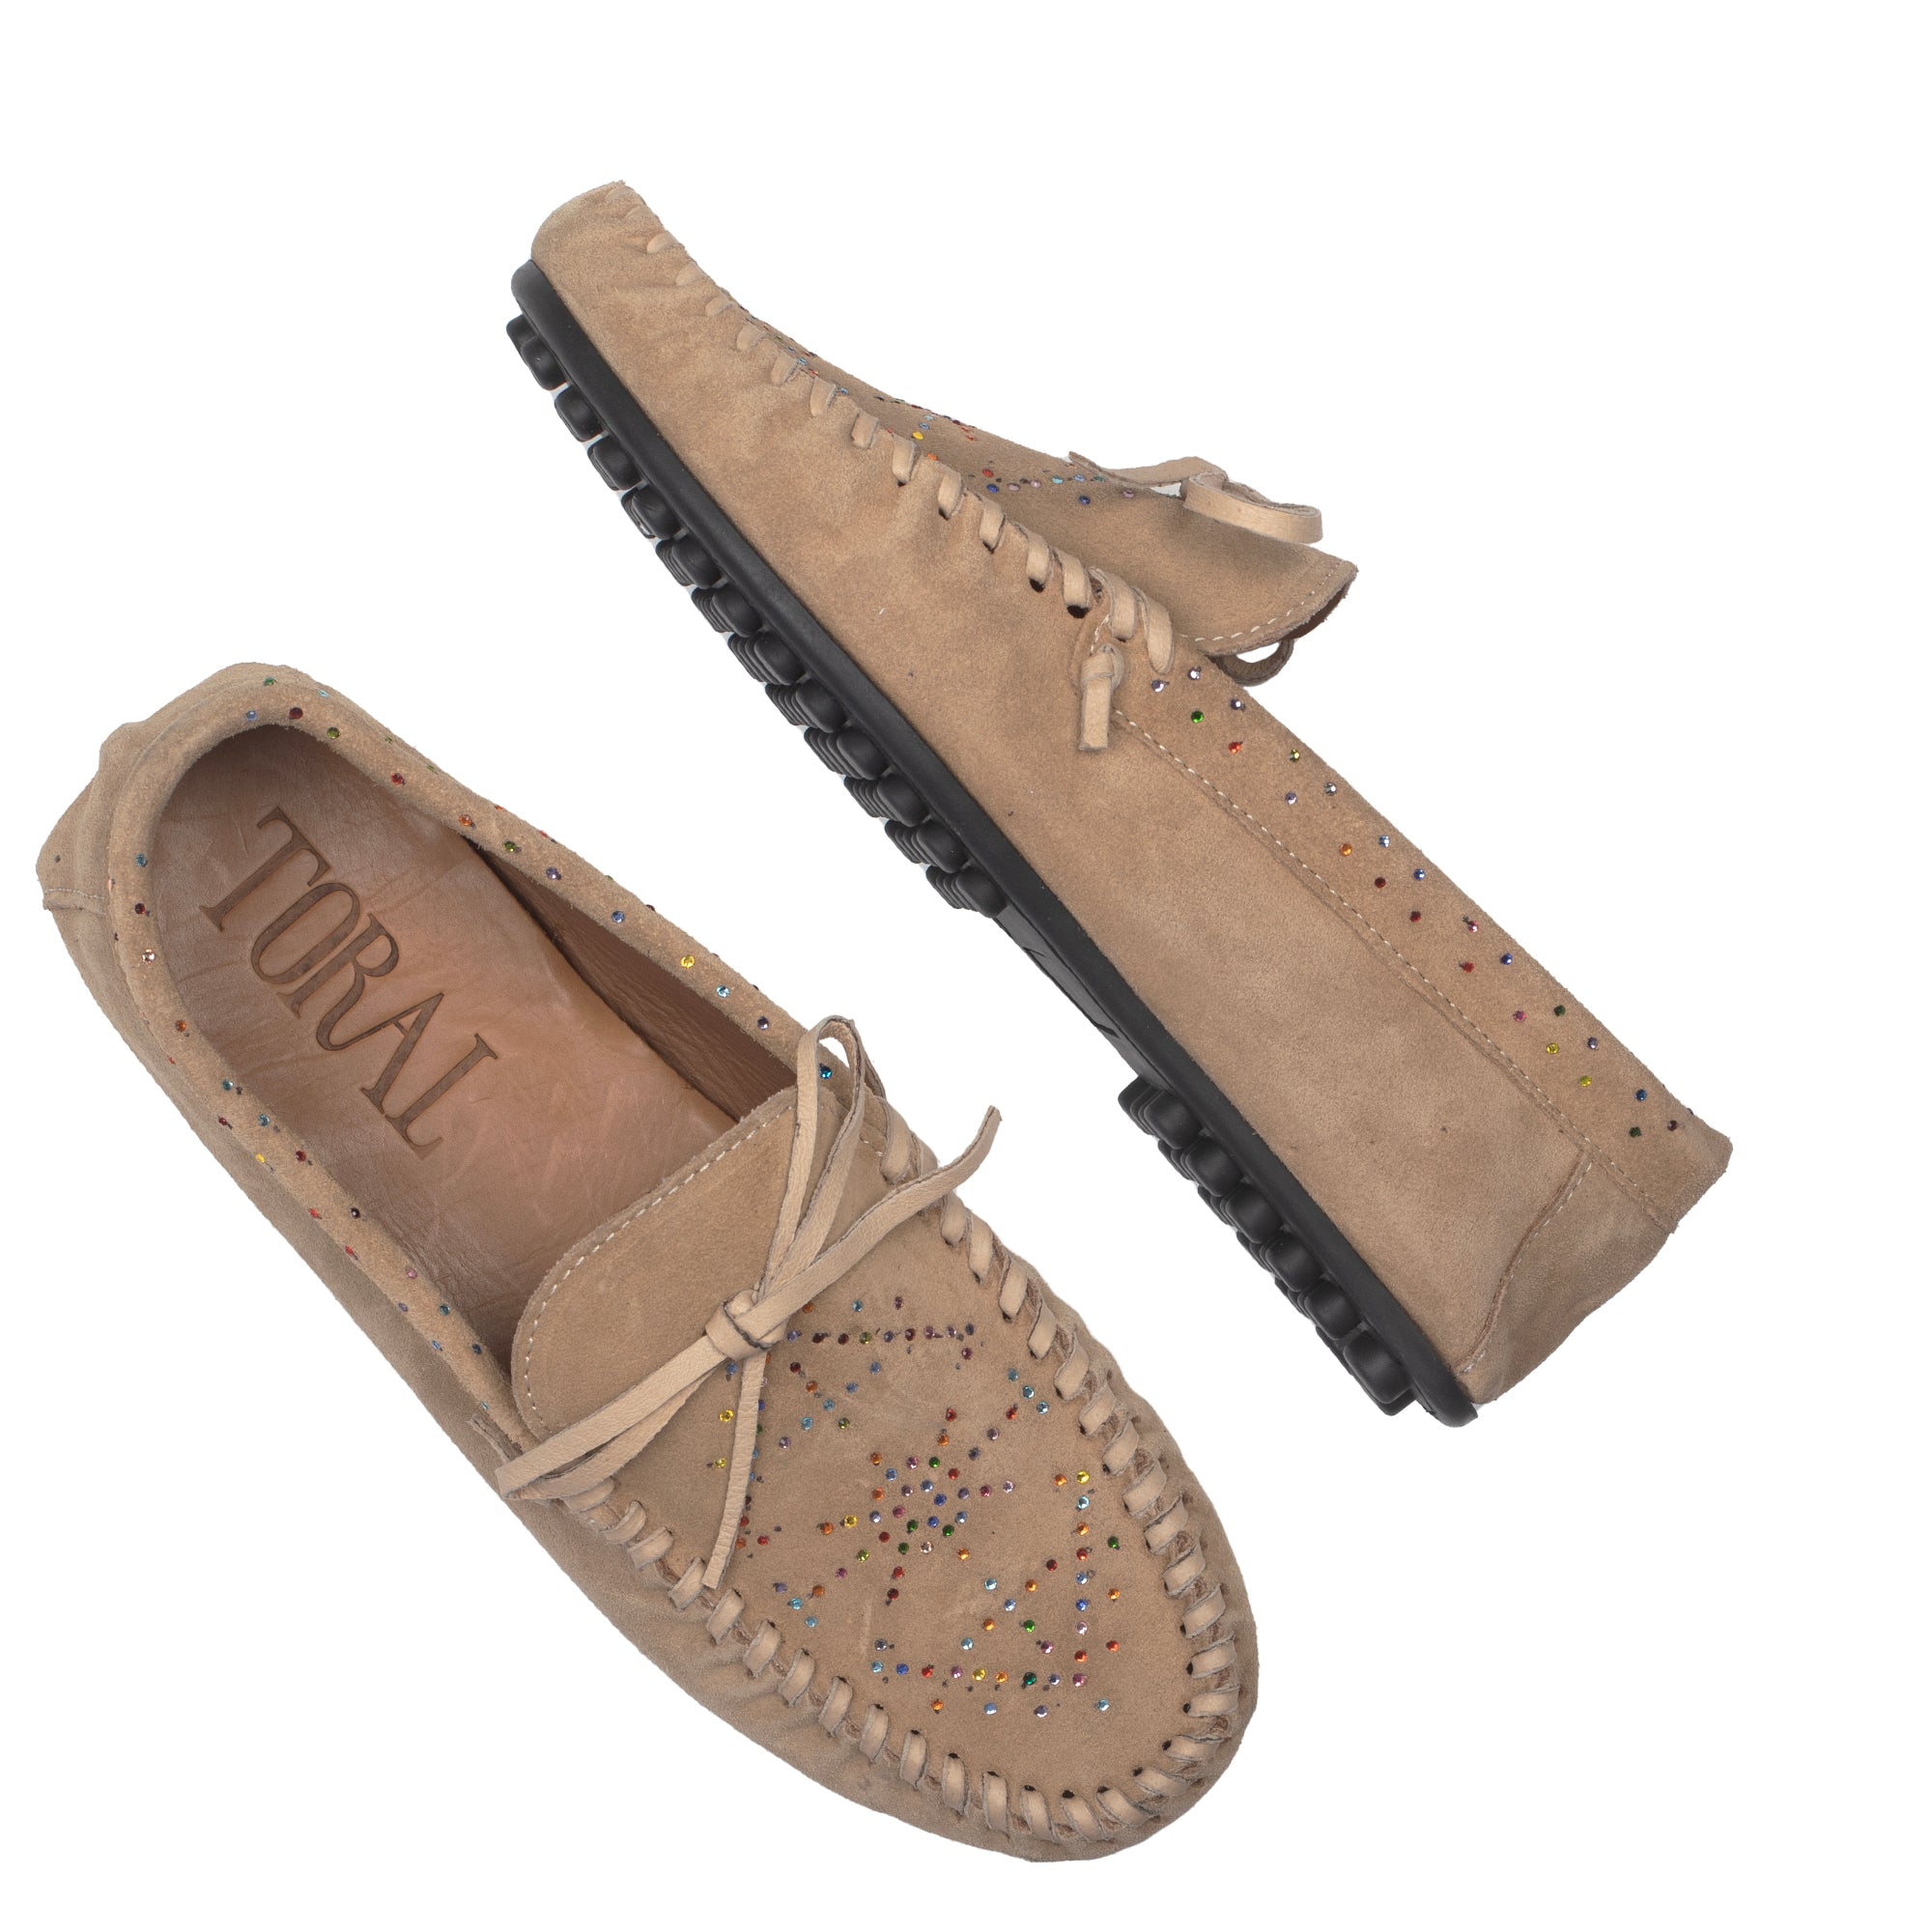 QUECHUA SAND LOAFERS MULTICOLORED STRASS